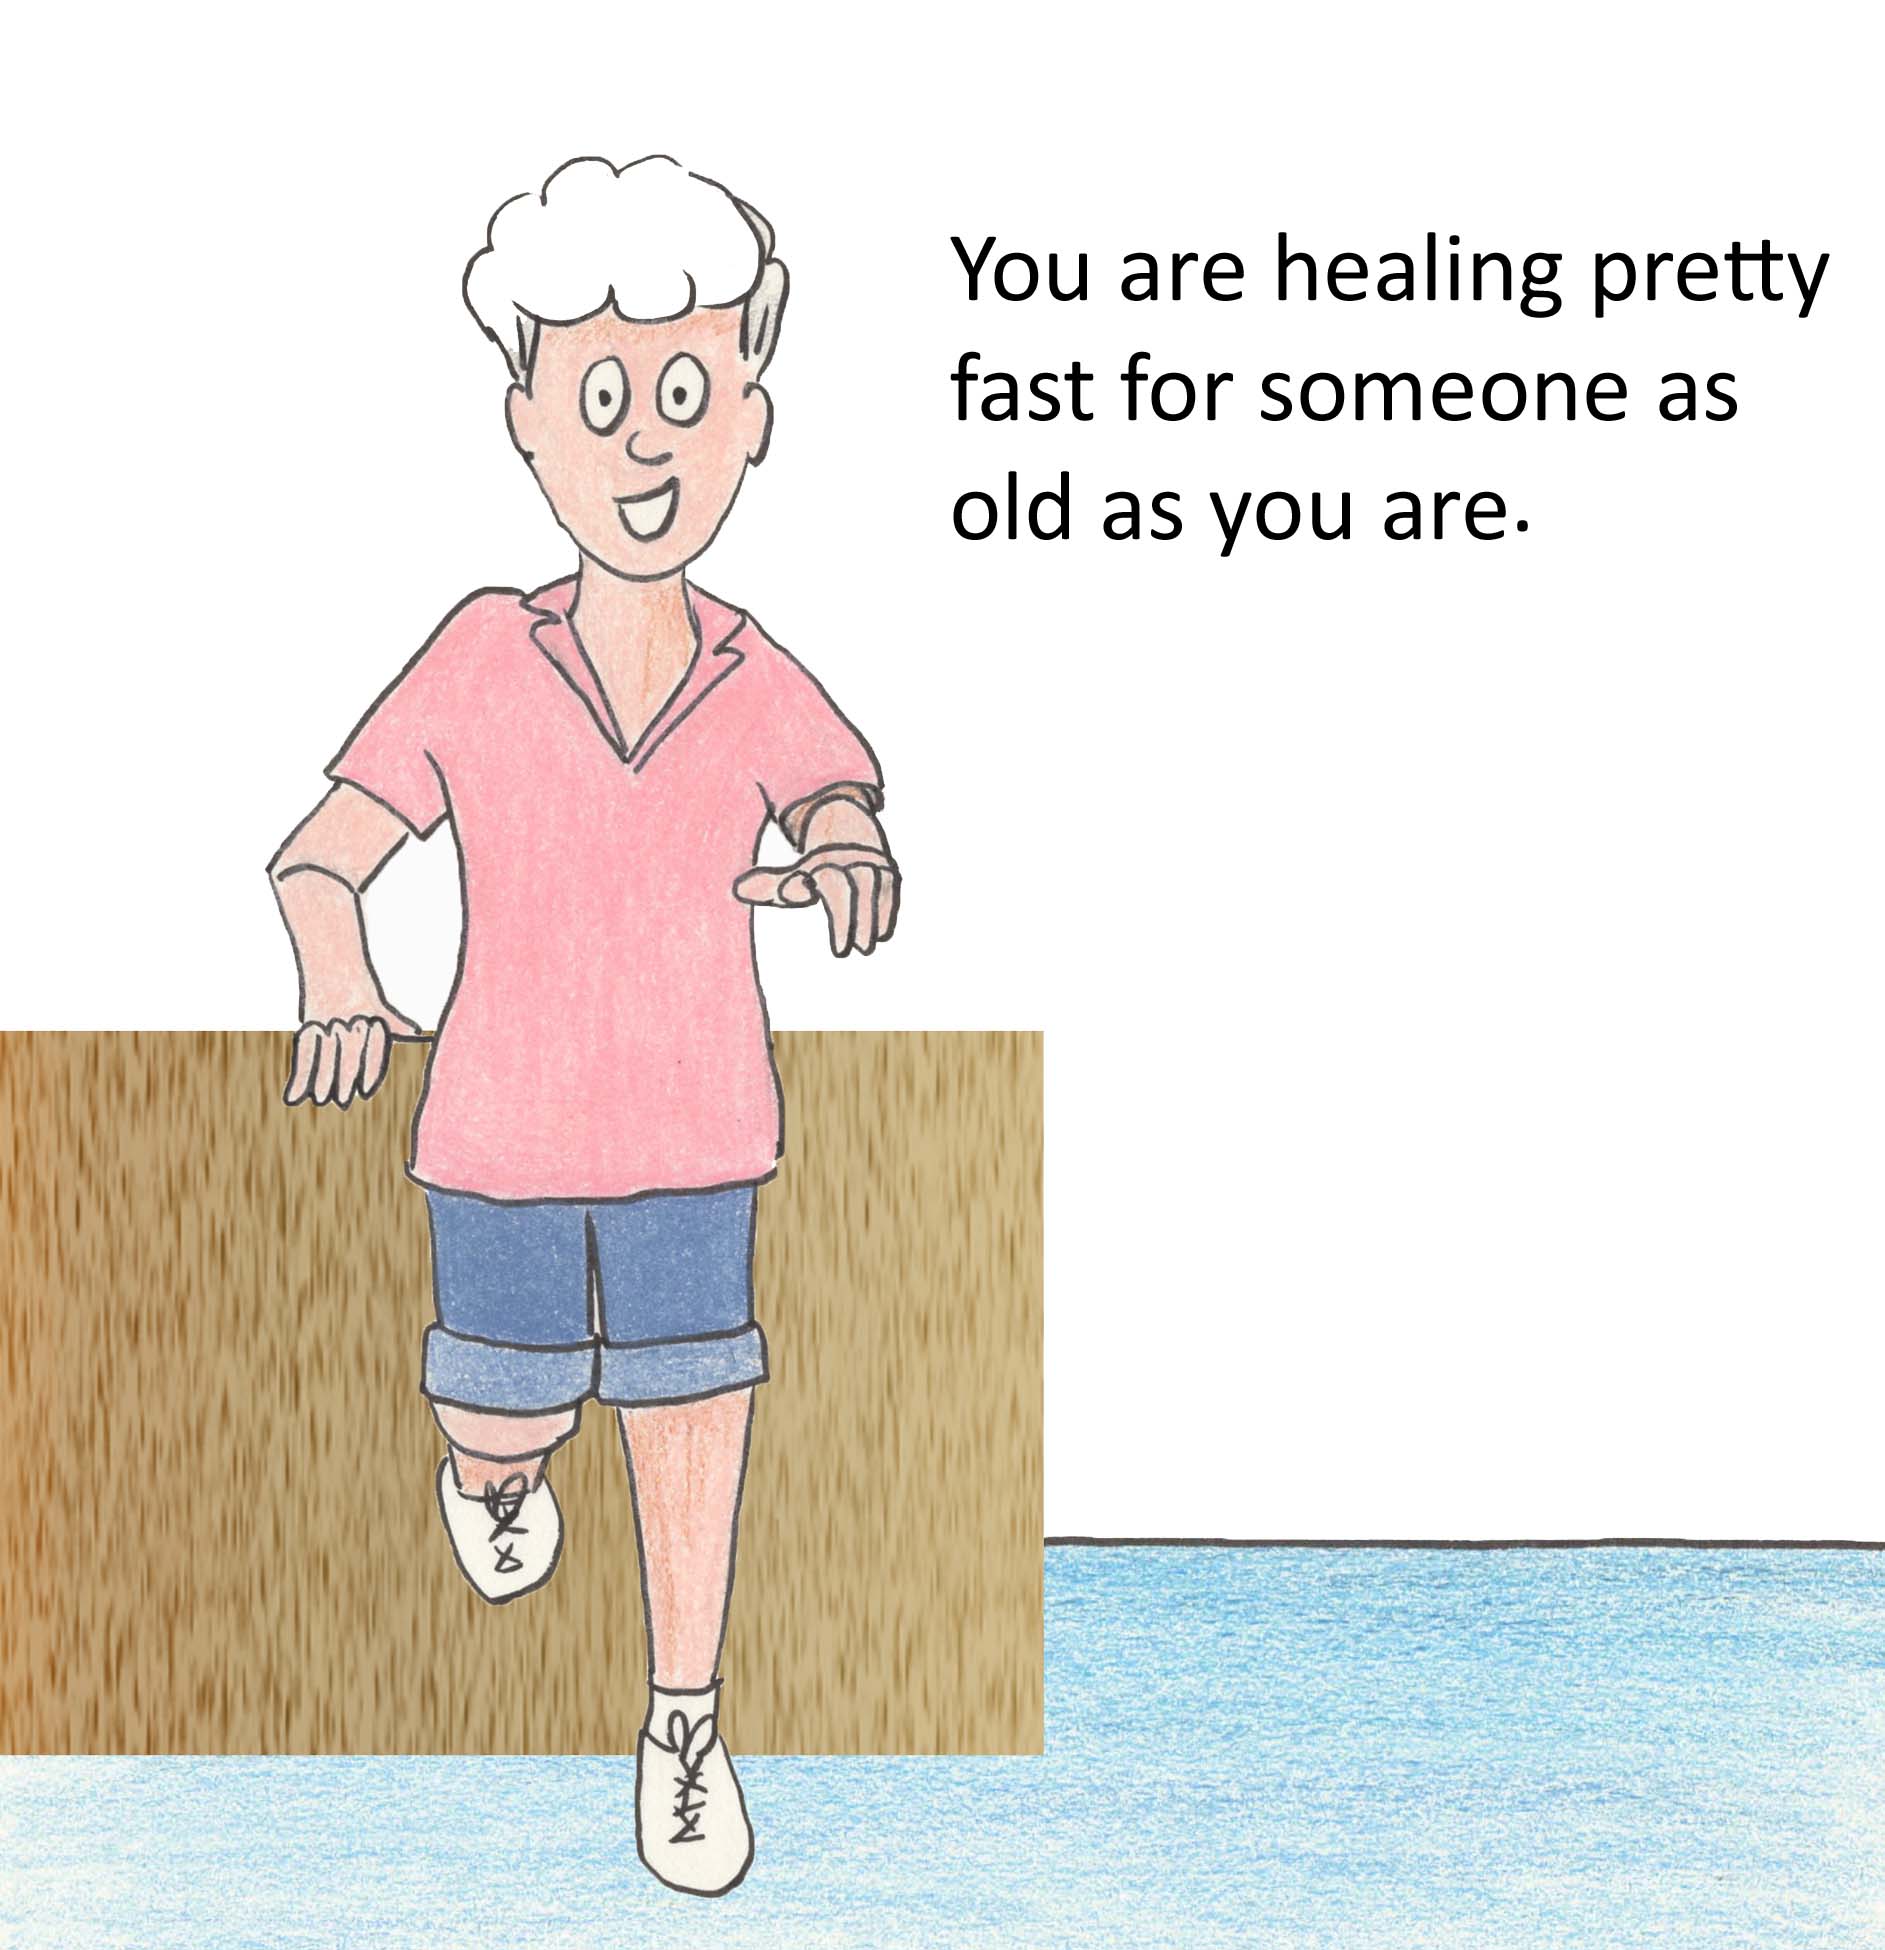 You are healing pretty fast for someone as old as you are.